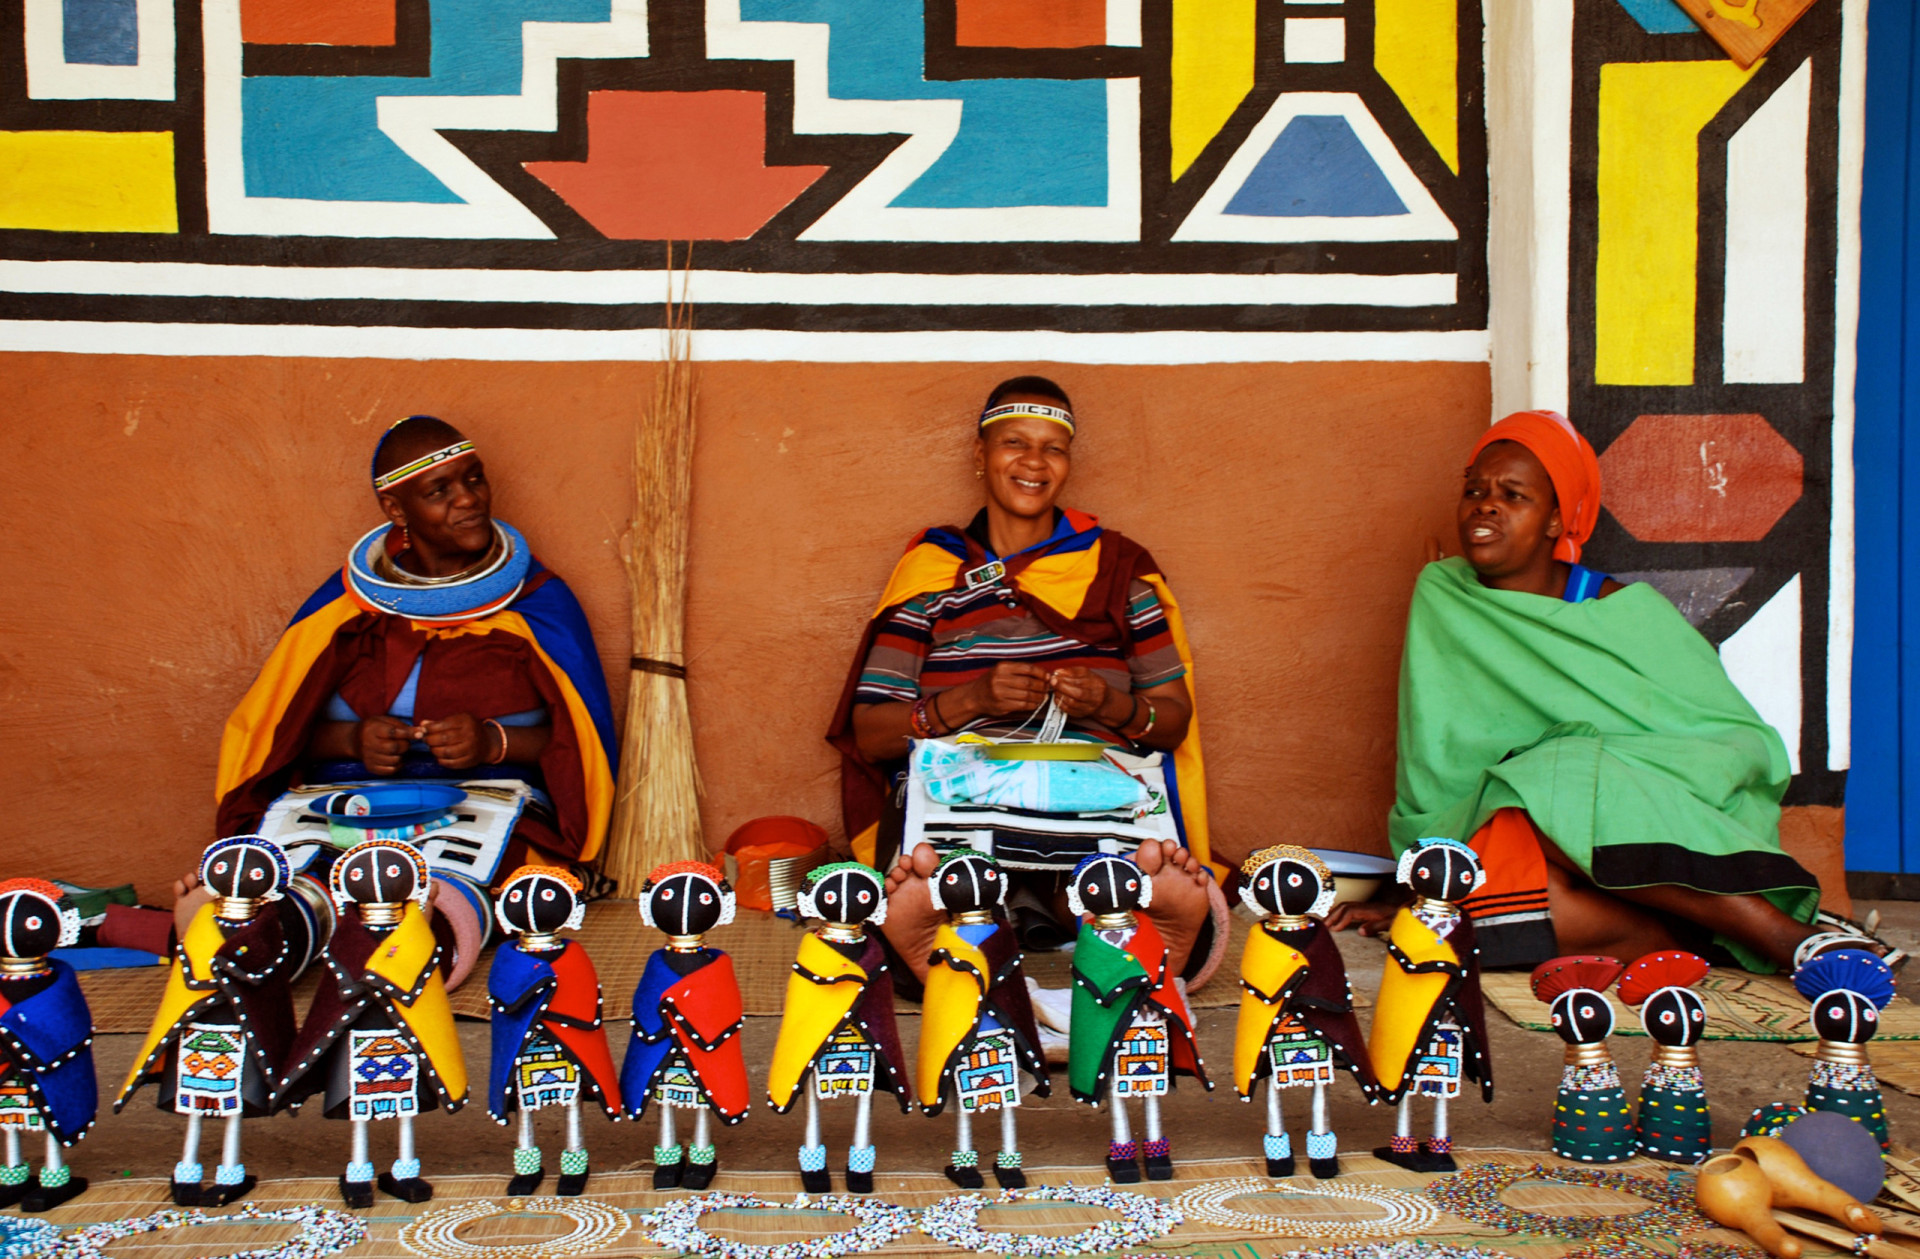 <p>The Ndebele people are known for their distinctive art, including vibrant geometric patterns used in their beadwork and house painting.</p><p><a href="https://www.msn.com/en-us/community/channel/vid-7xx8mnucu55yw63we9va2gwr7uihbxwc68fxqp25x6tg4ftibpra?cvid=94631541bc0f4f89bfd59158d696ad7e">Follow us and access great exclusive content every day</a></p>